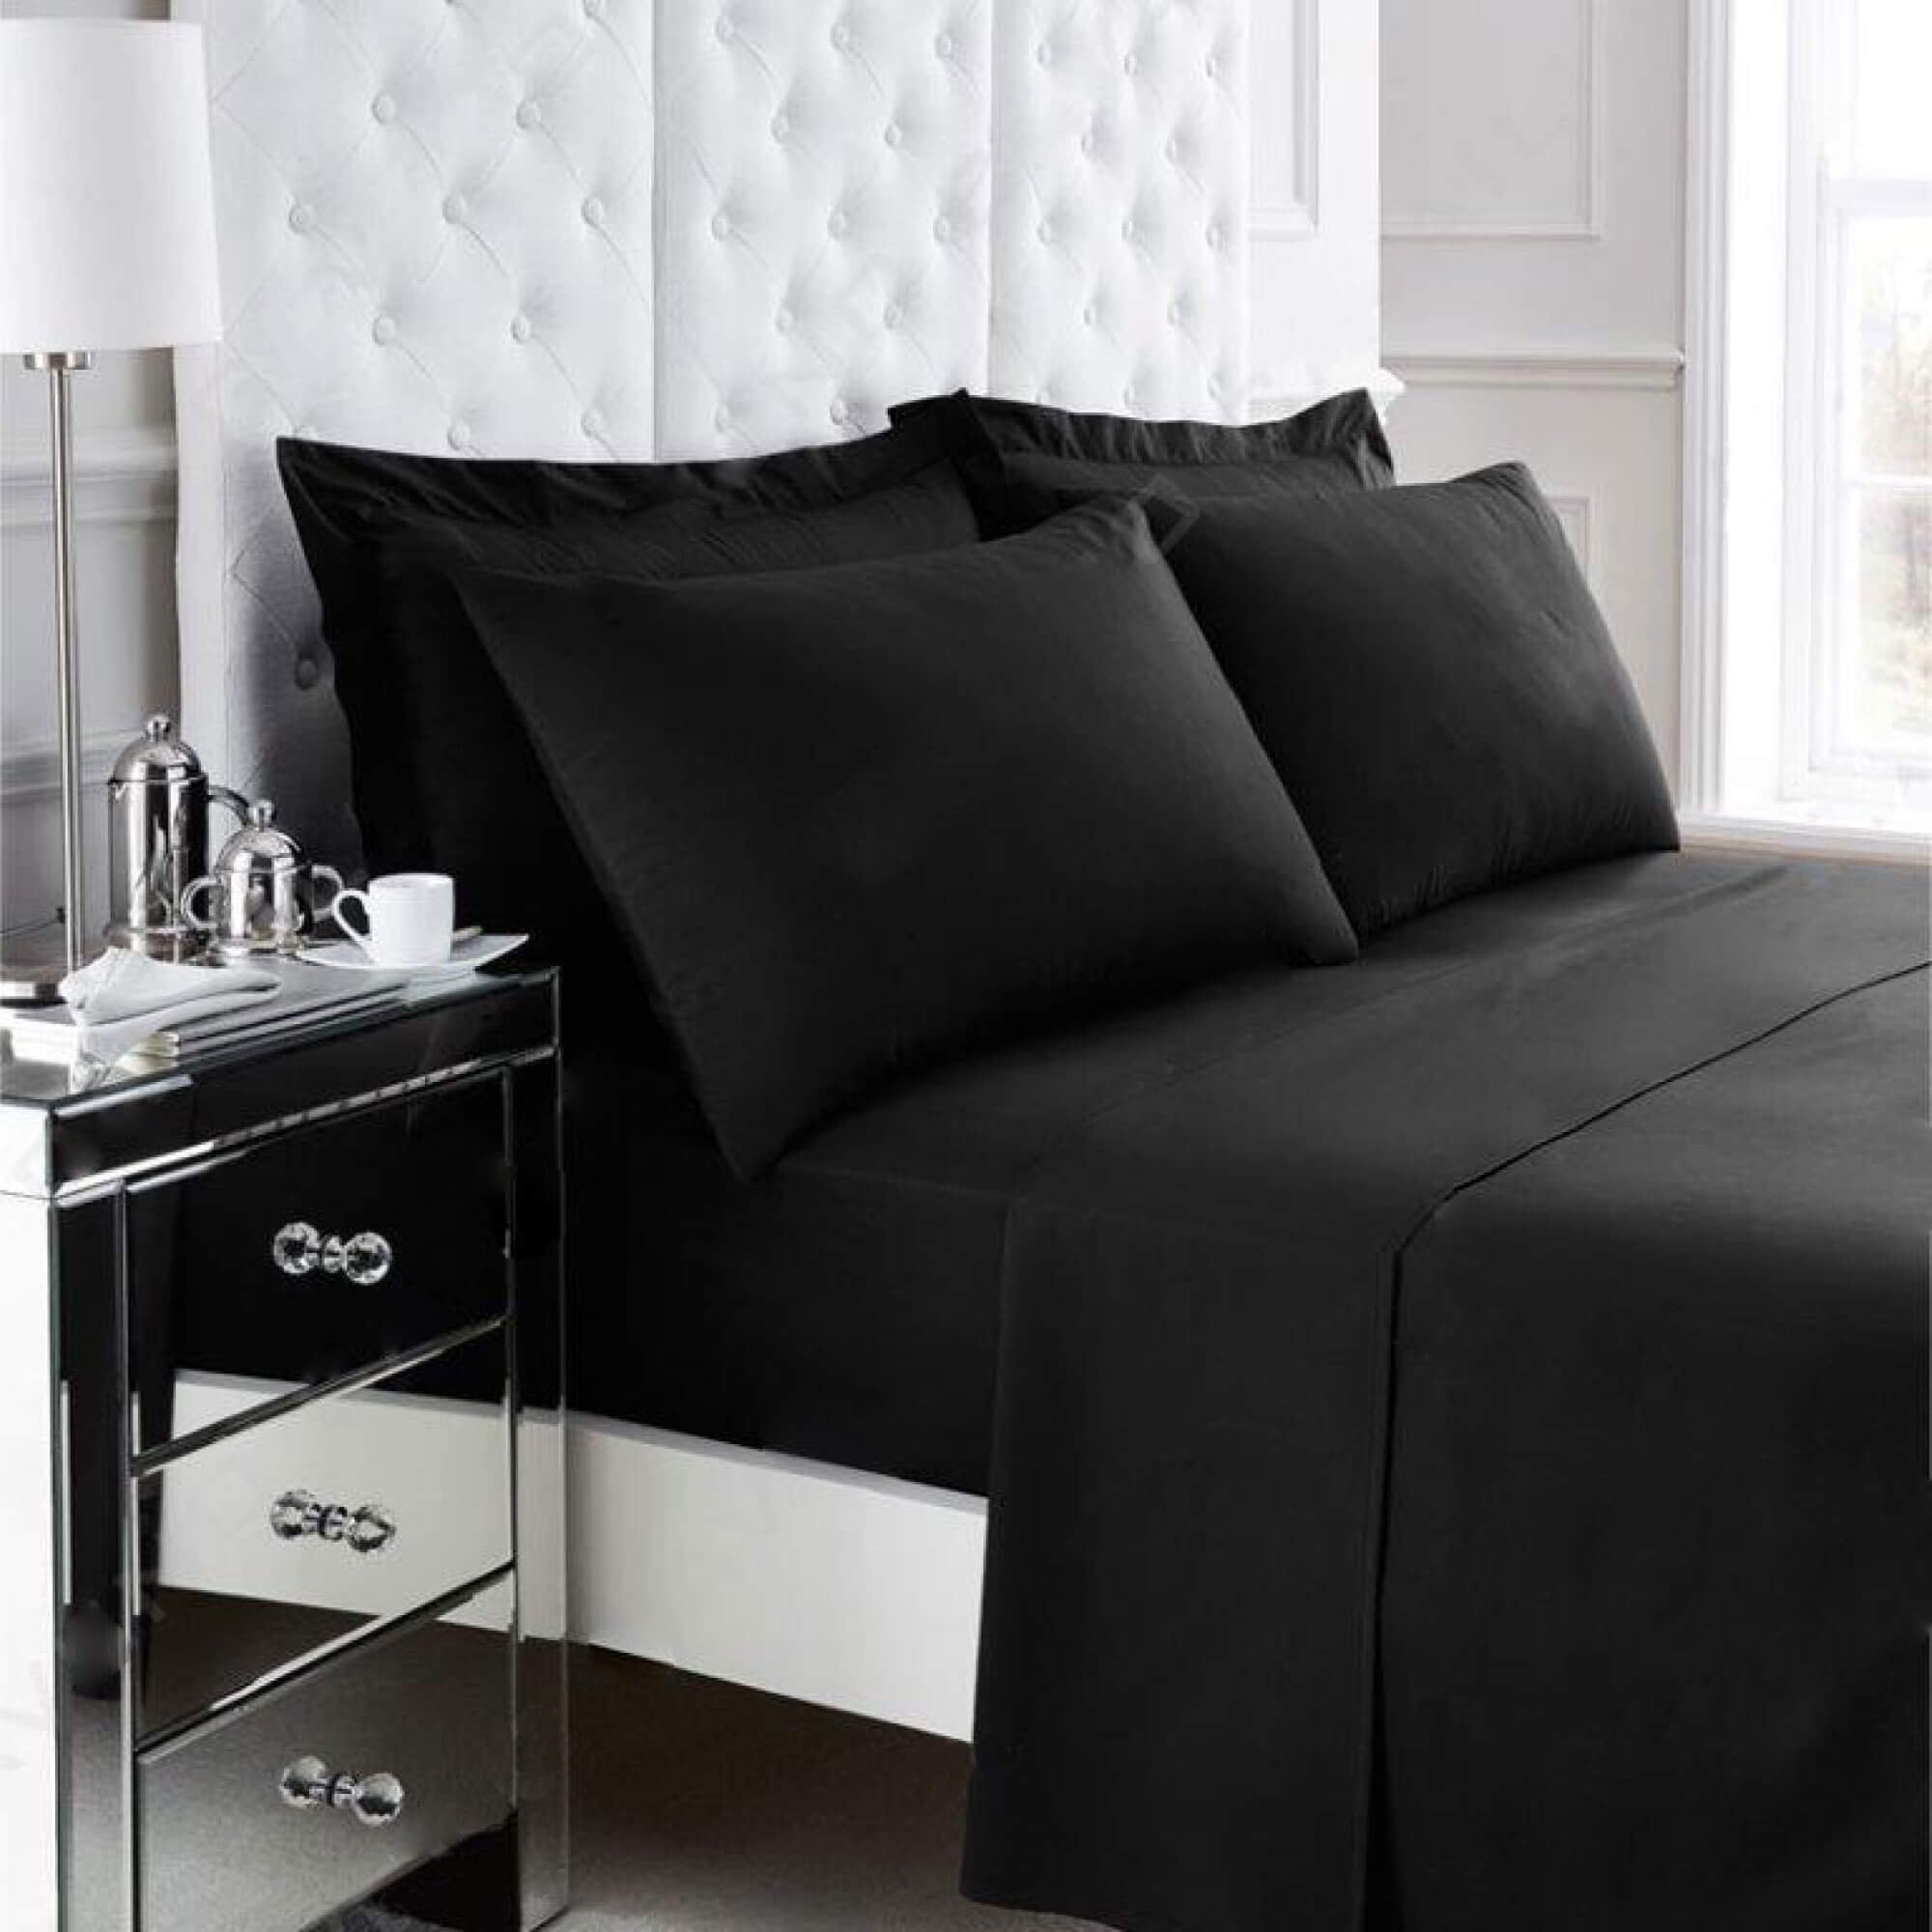 Non Iron Percale Bedding Sheet Range - Black - King Fitted - TJ Hughes